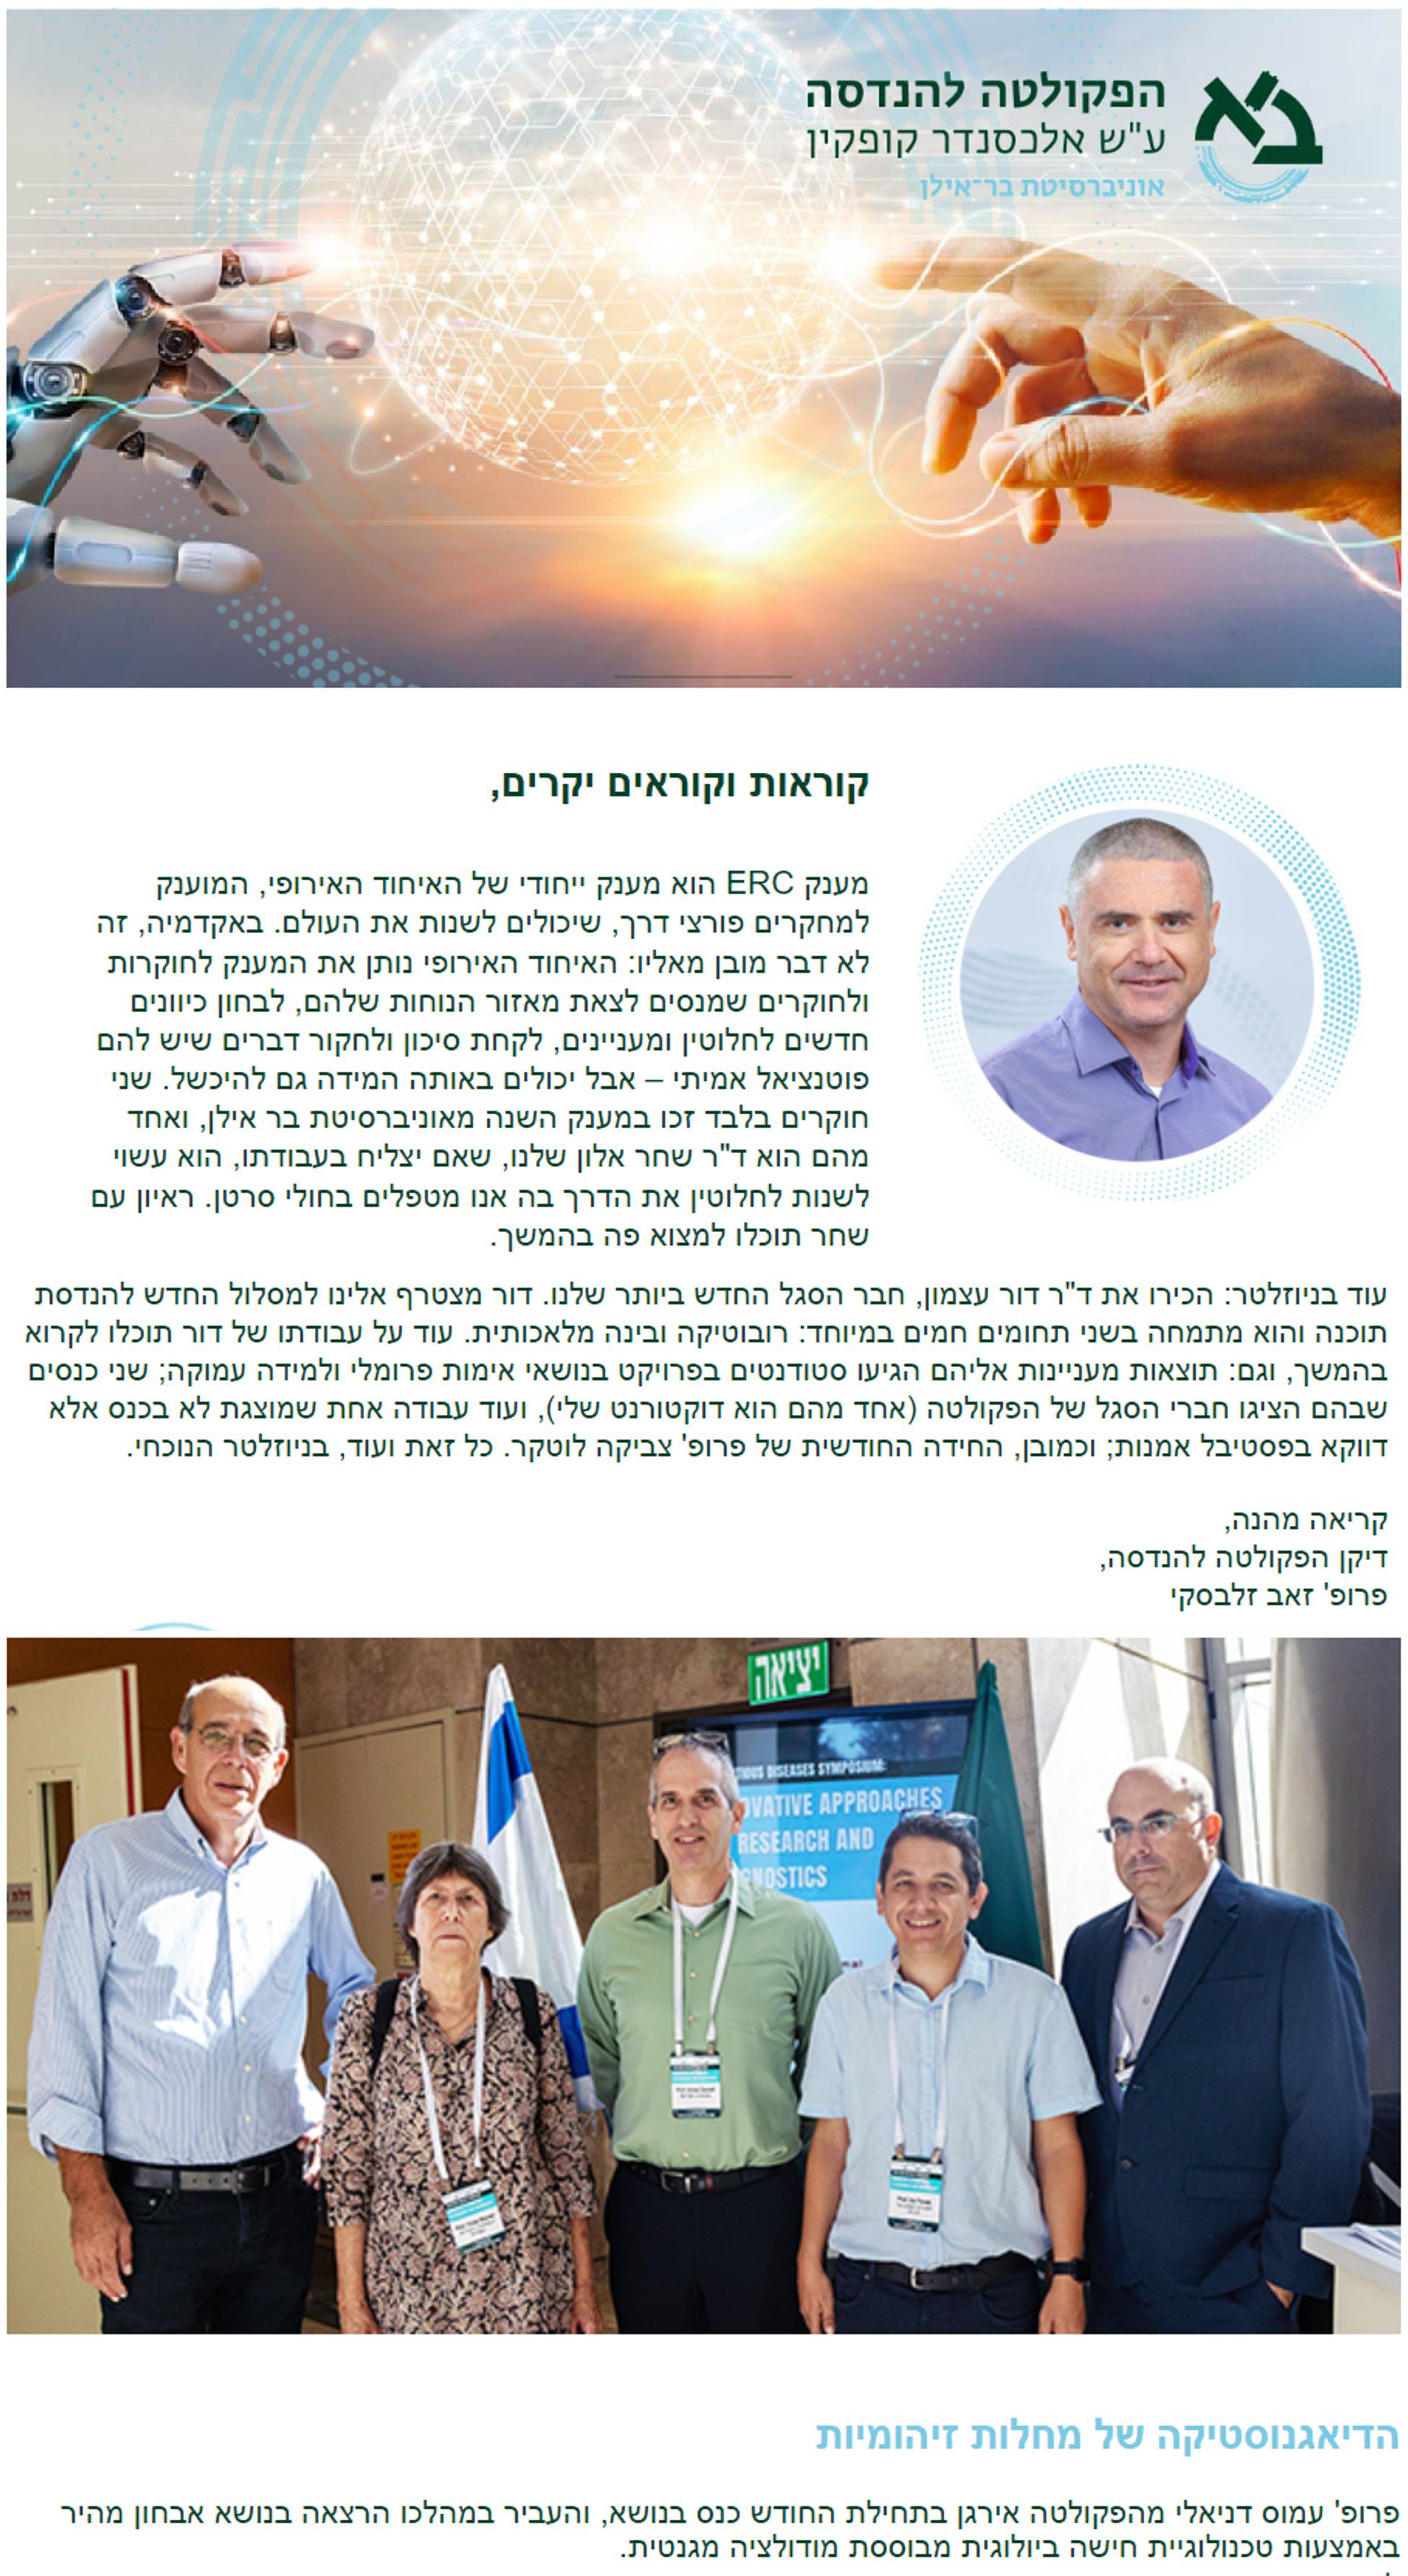 An article in the newsletter of the Faculty of Engineering, Bar-Ilan University on a three-day symposium, "Infectious Disease Symposium: Innovative Approaches to Diagnostics and Research", which was held at the Institute of Nanotechnology and Advanced Materials of Bar Ilan University on September 5-7th. The National Scientific Committee for the conference was comprised of four distinguished professors, including our Principal Investigator, Prof. Amos Danielli. Among the various presentations, Prof. Danielli has given a talk about "Rapid and highly sensitive diagnosis of Zika, dengue, and West Nile viruses infection using Magnetic Modulation Biosensing technology". Also, as part of the program, the conference attendees were privileged to hear a lecture by our Optical Imaging and Biosensing lab Ph.D. graduate, Dr. Michael Margulis, on "Saliva-based diagnosis of respiratory diseases".